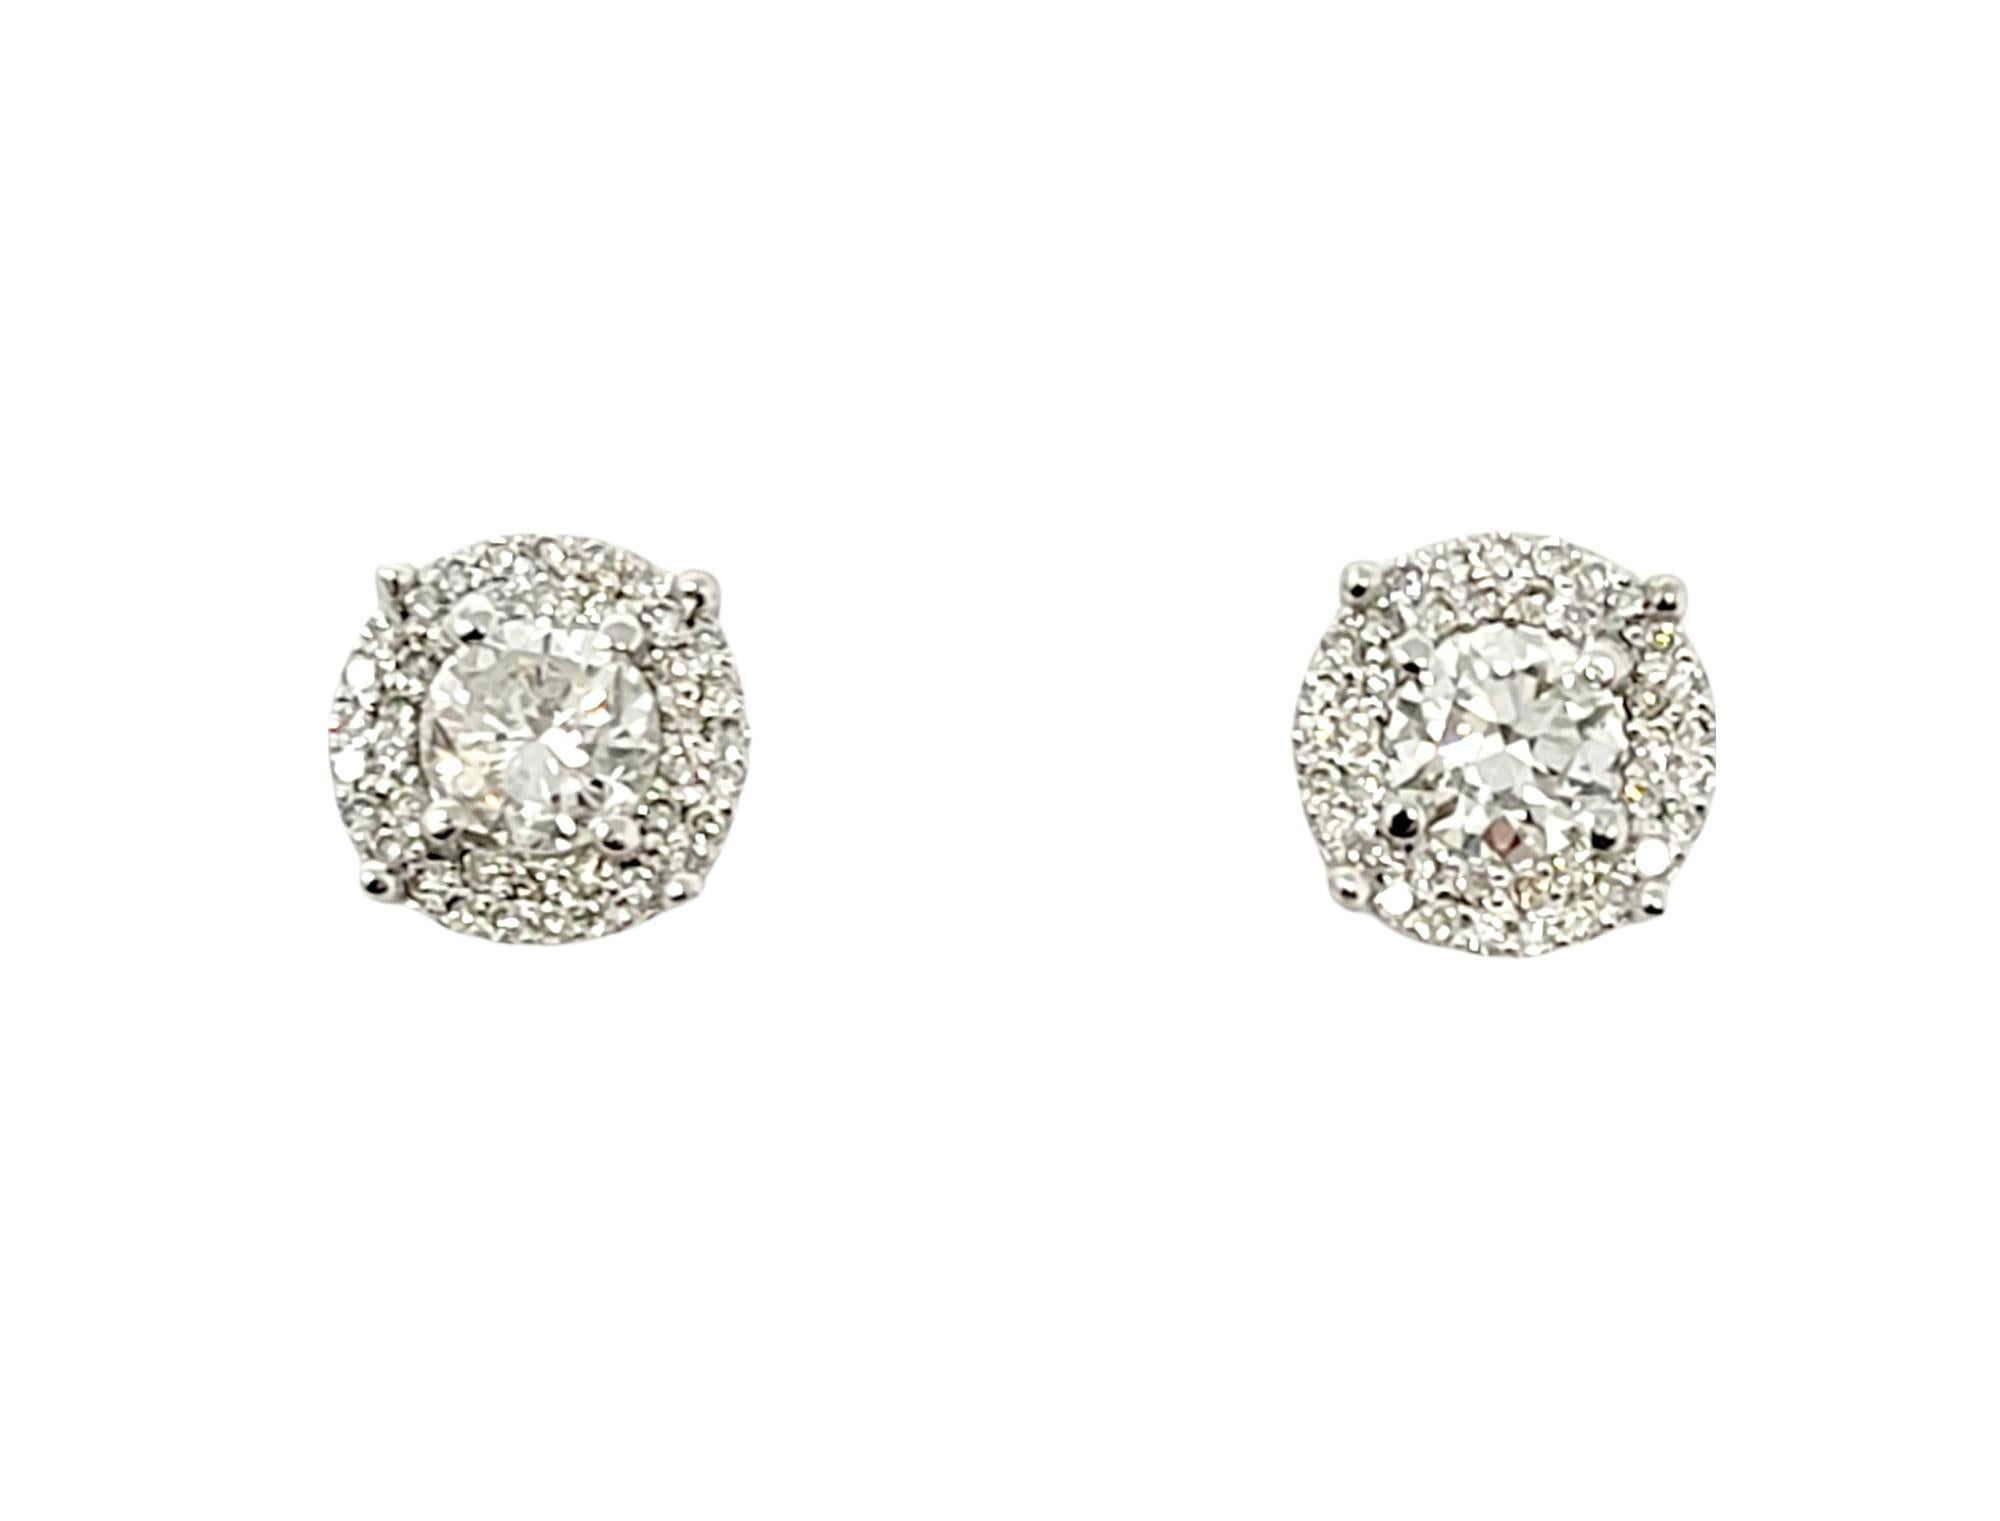 Beautiful, timeless diamond stud earrings with an elevated modern twist. They feature a single sparkling prong set center stone surrounded by a glittering halo of accent diamonds. The gorgeous pave diamond studs offer substantial sparkle and glamour